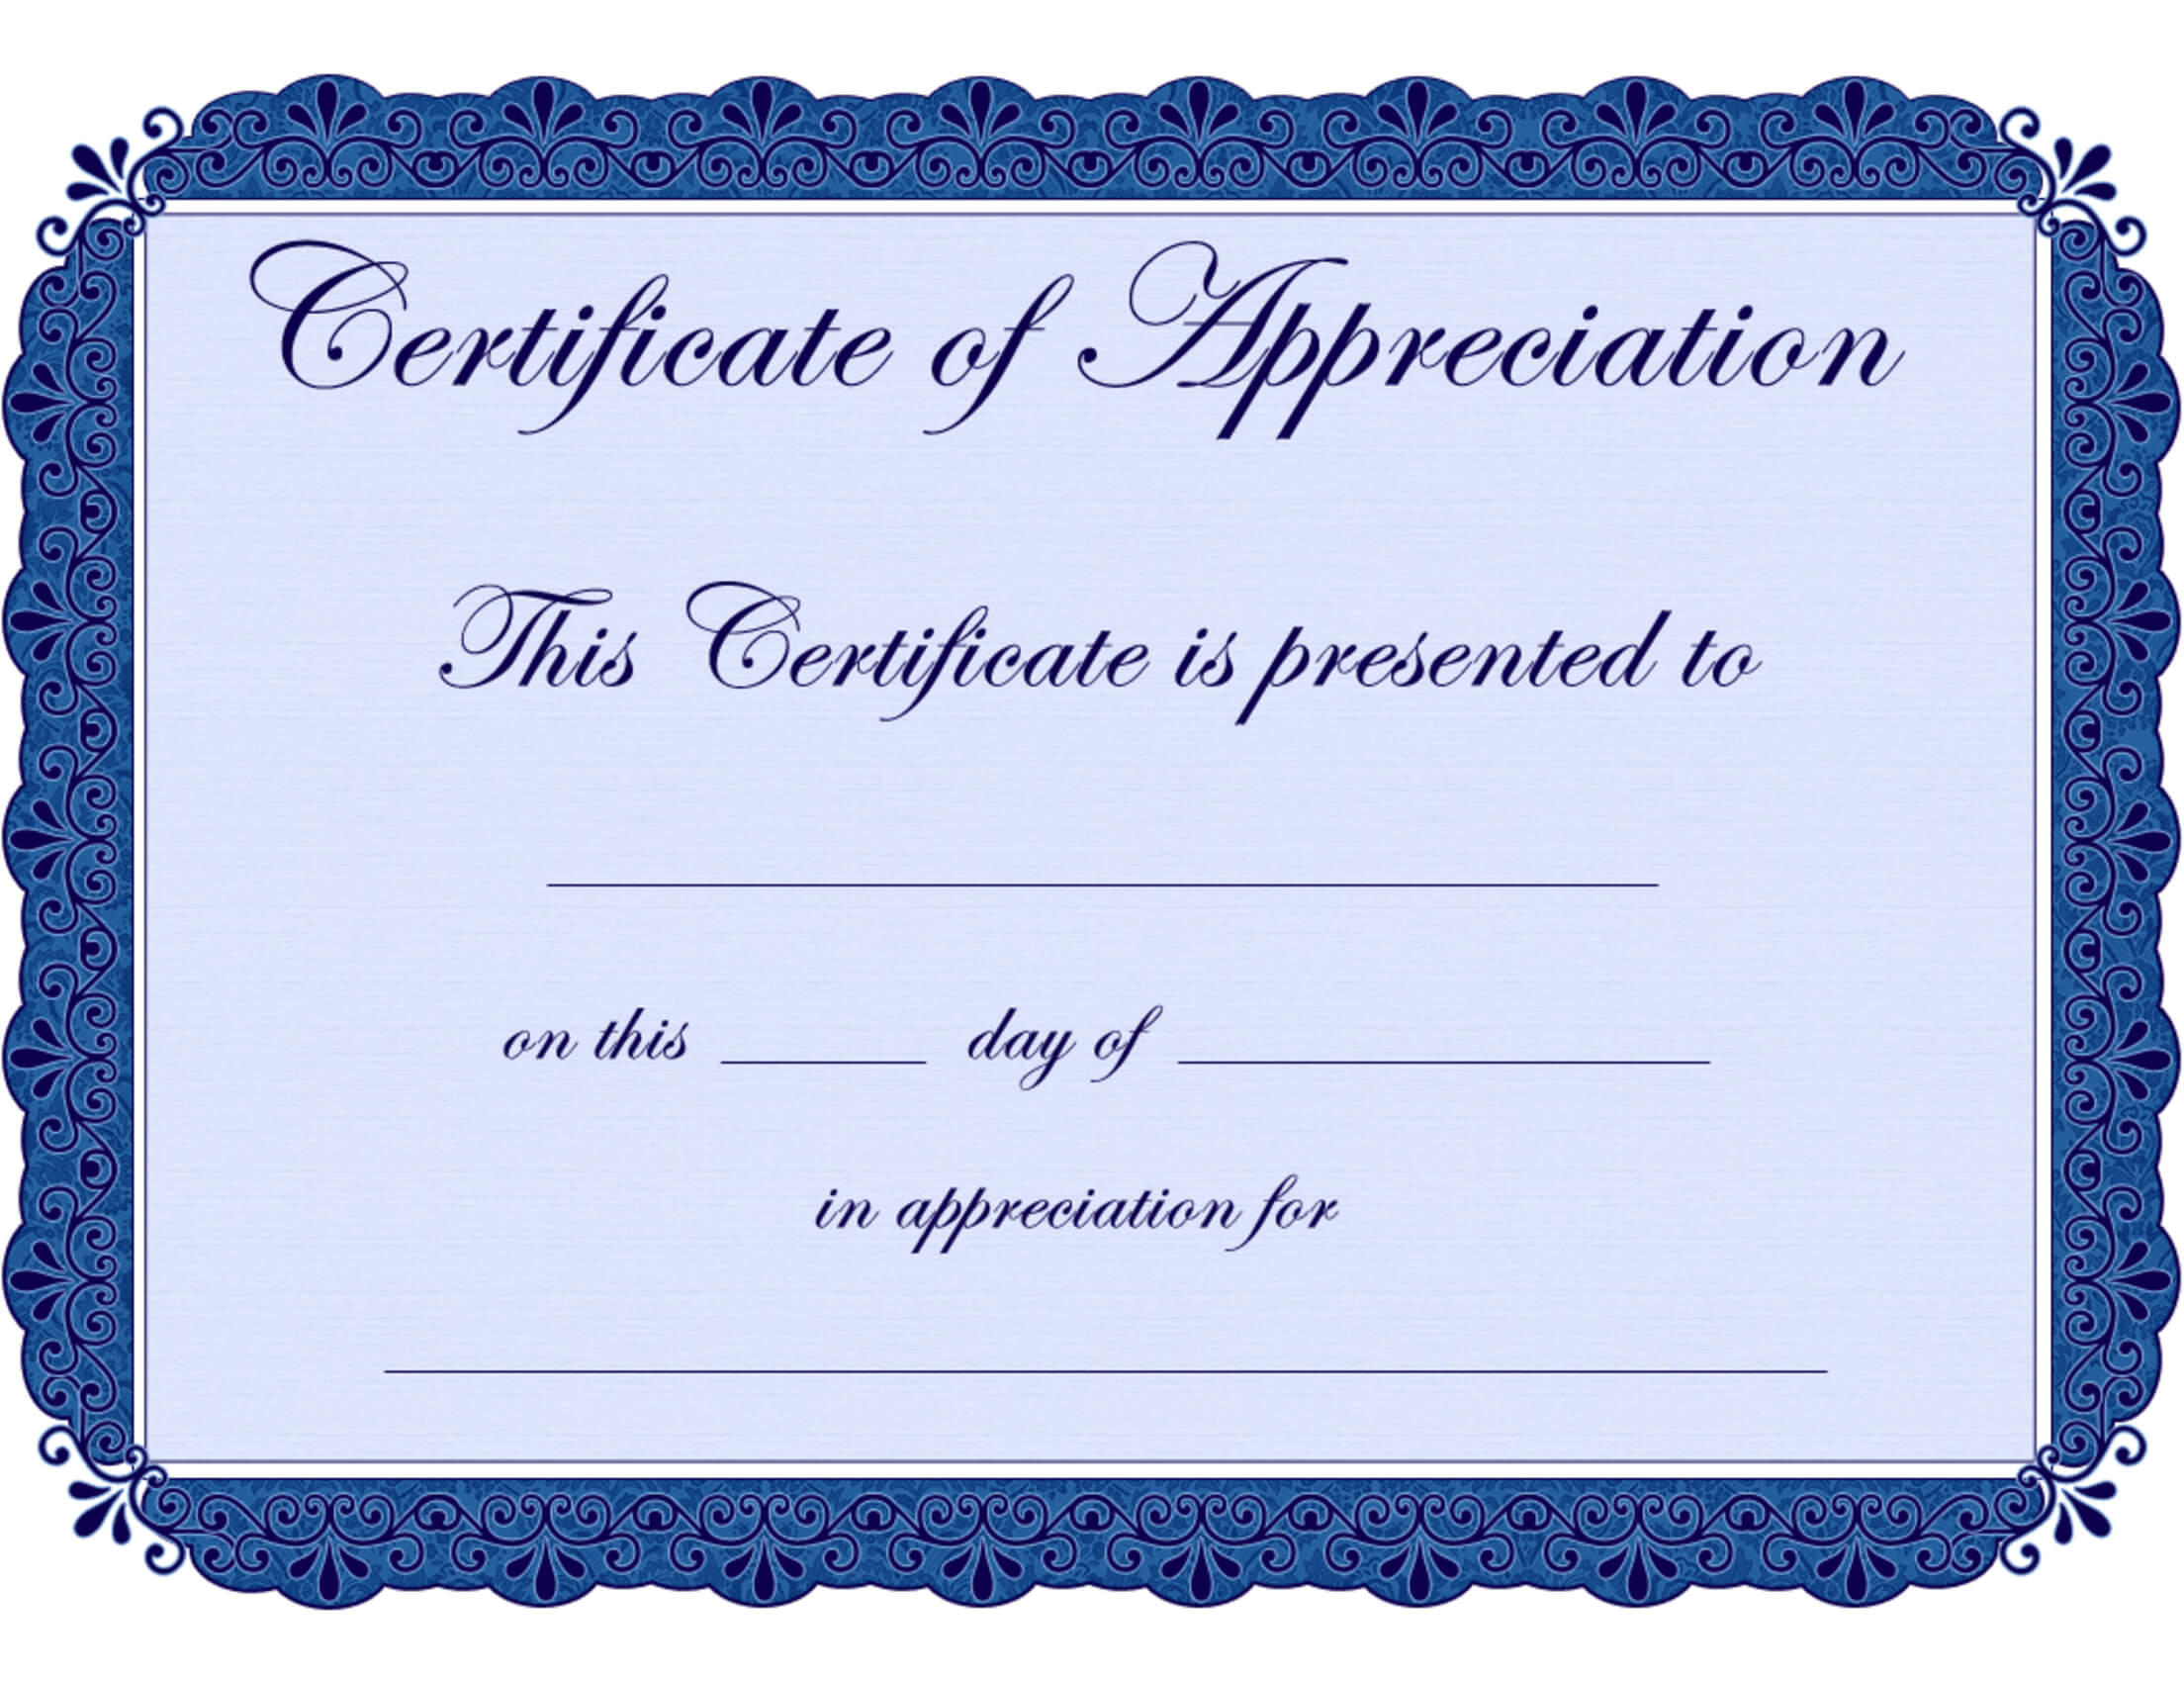 Free Printable Certificates Certificate Of Appreciation Regarding Safety Recognition Certificate Template